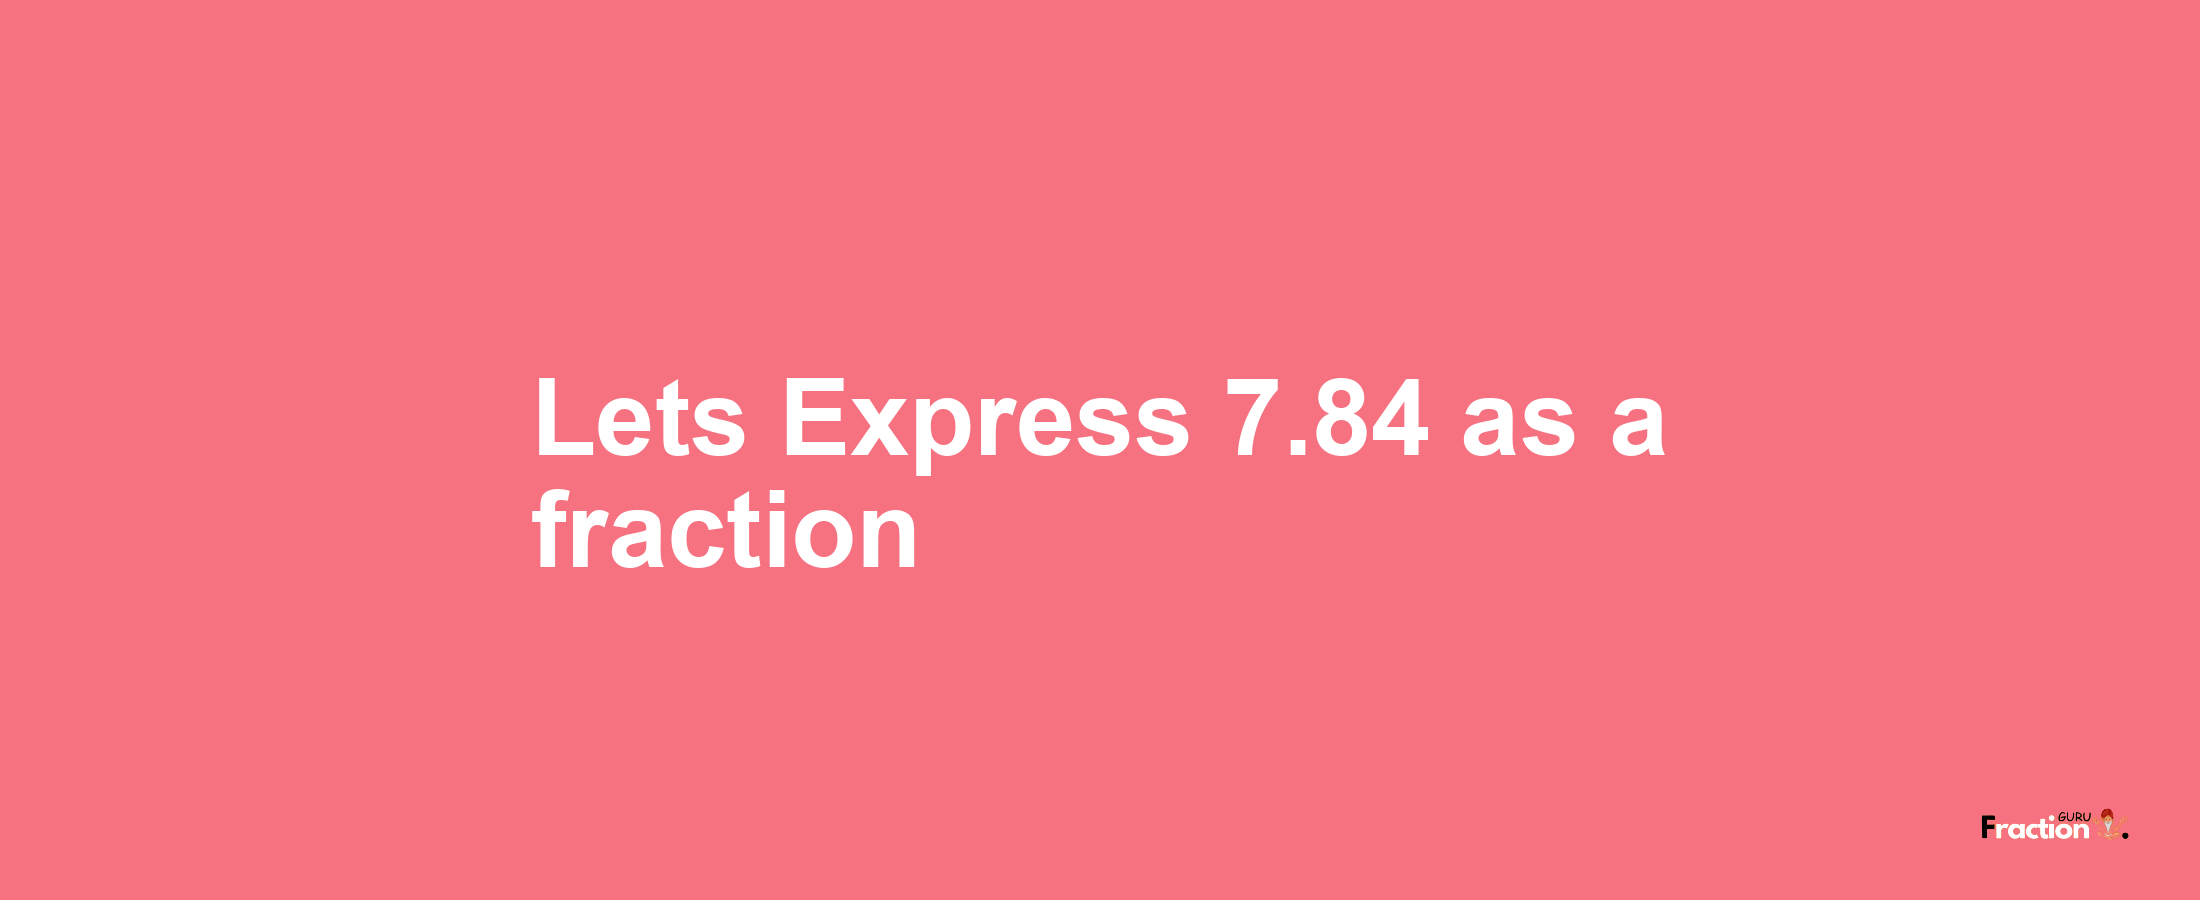 Lets Express 7.84 as afraction